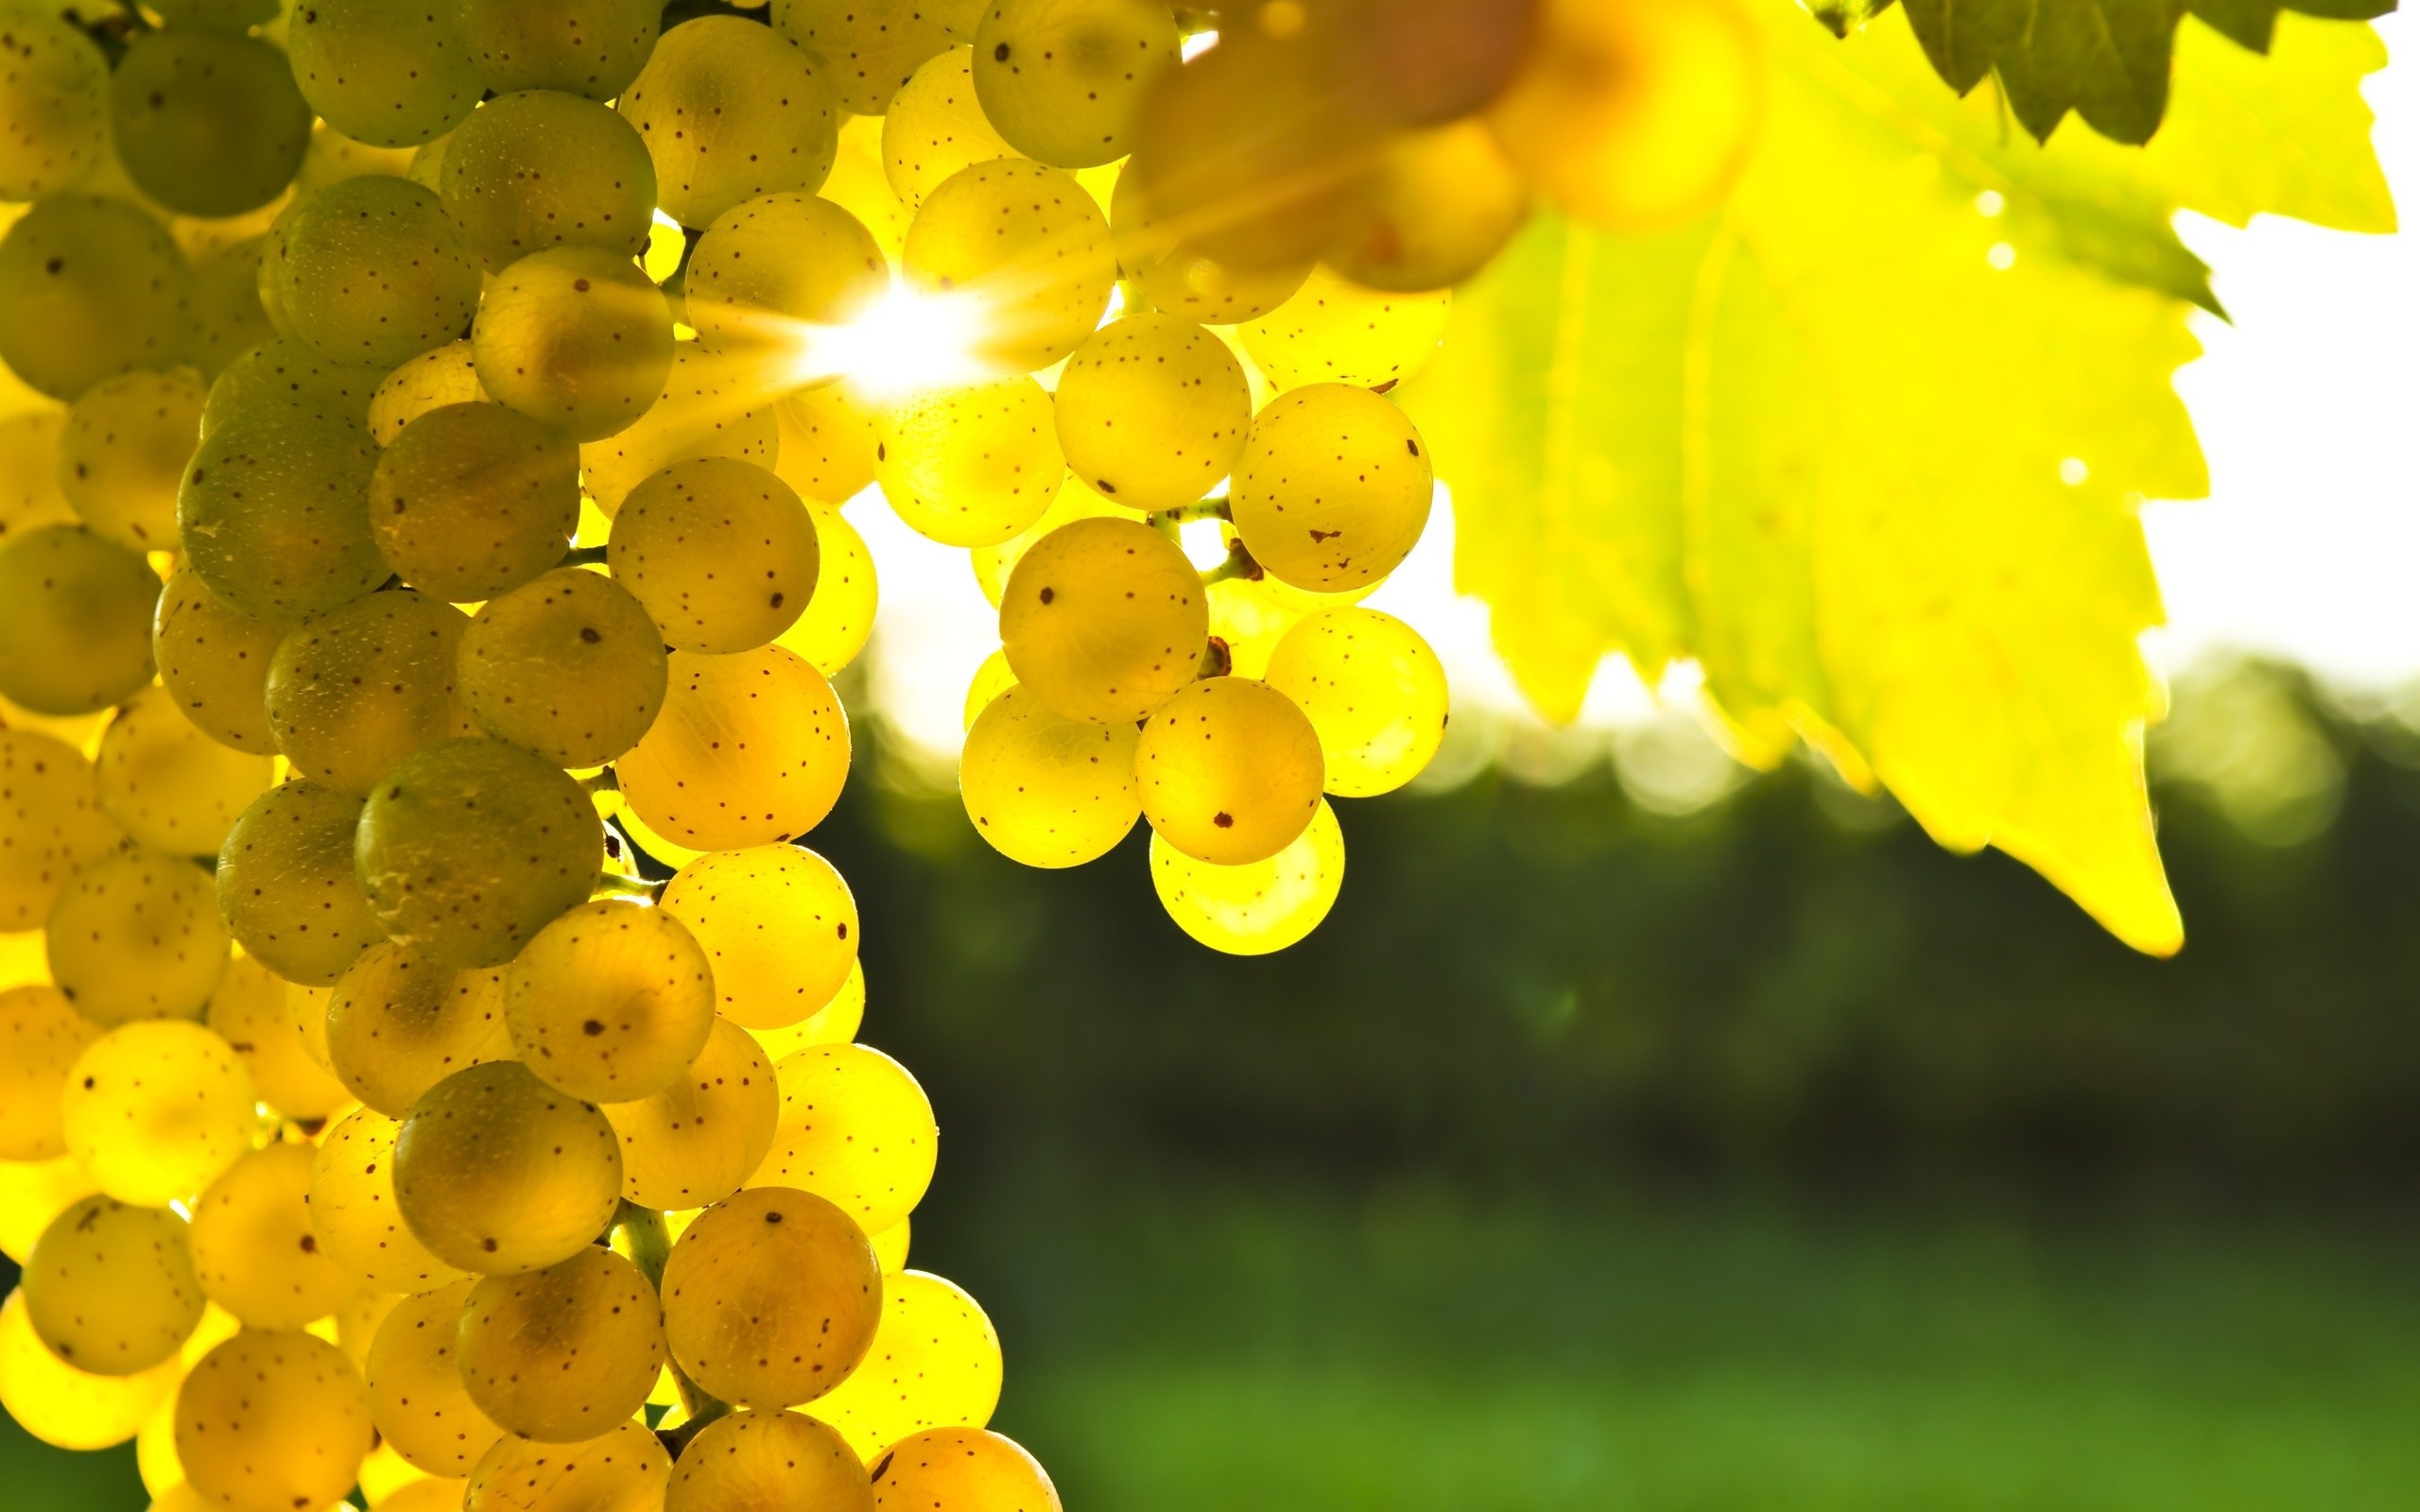 yellow grapes sunlight wide hd wallpaper is a lovely background.